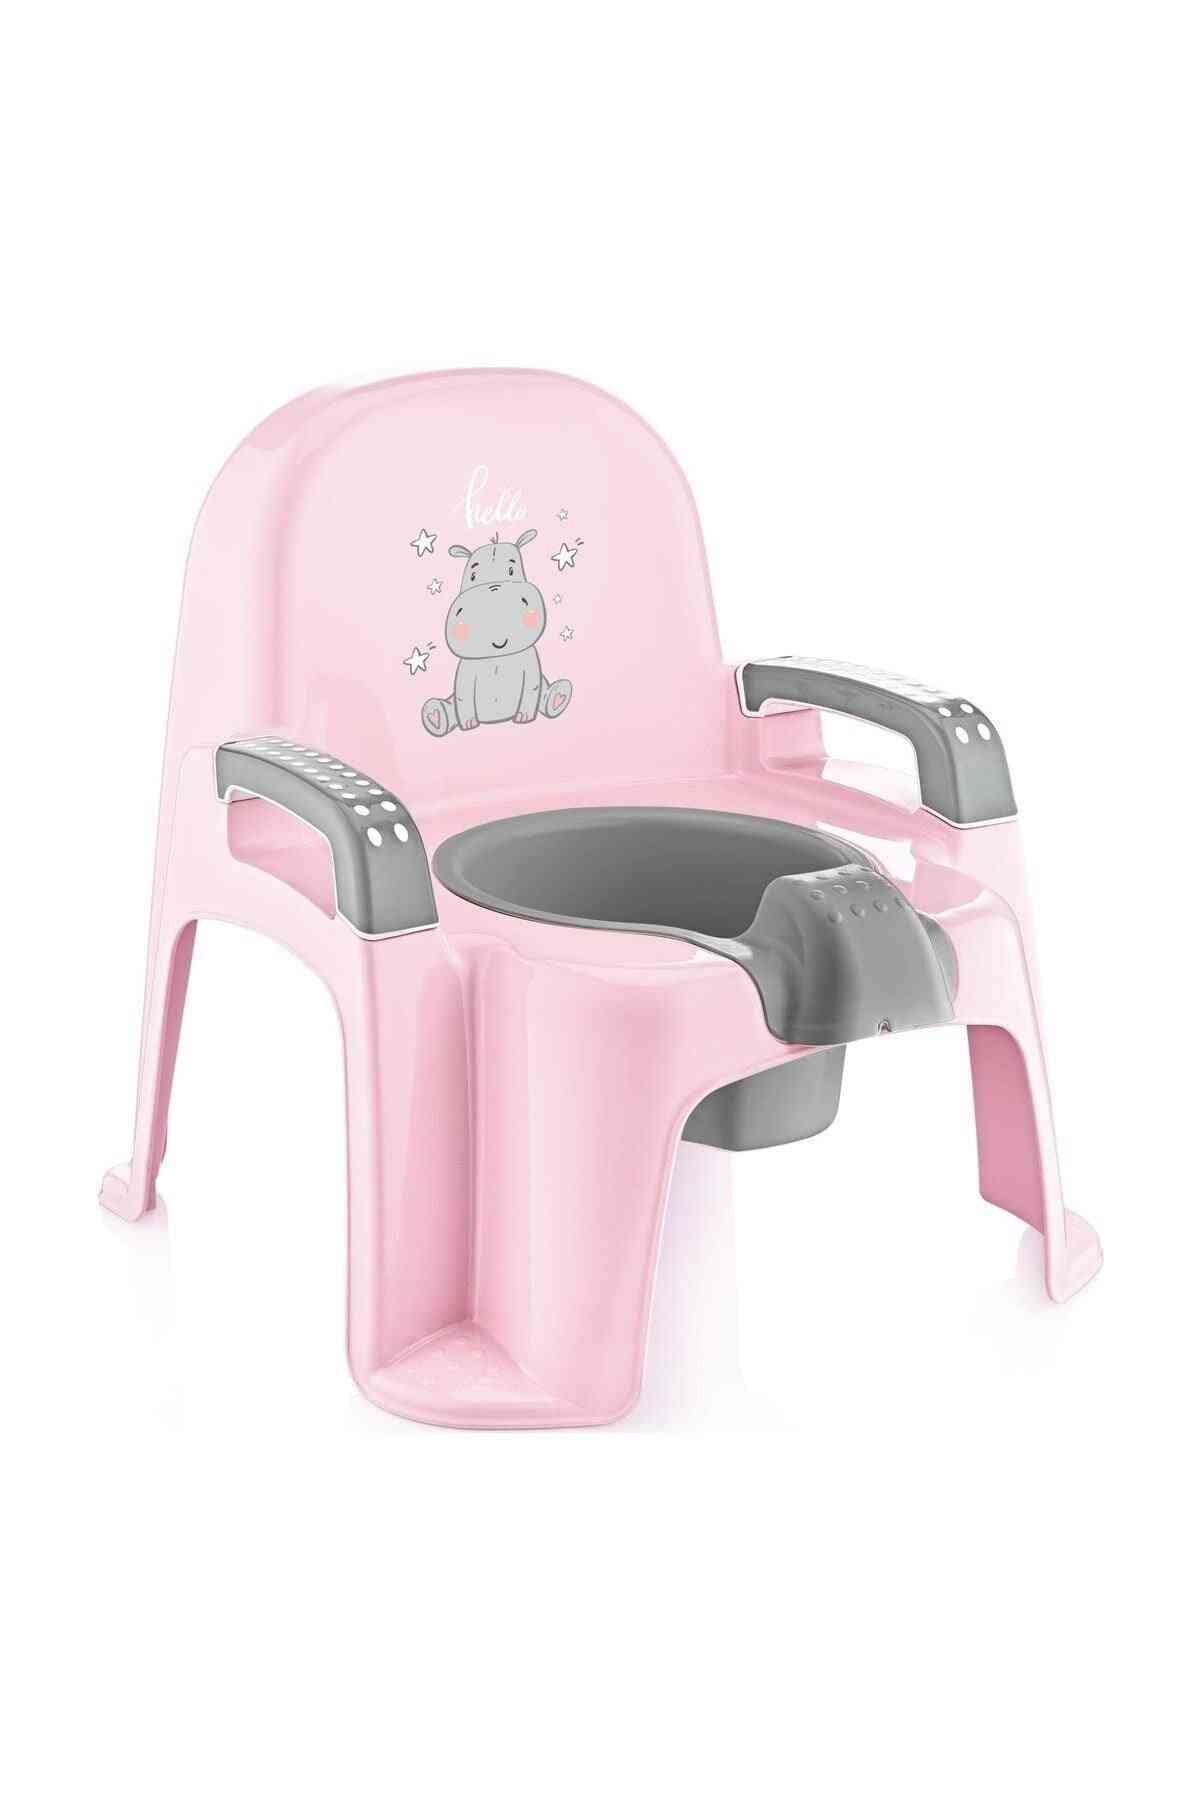 Portable Baby Potty Training Chair